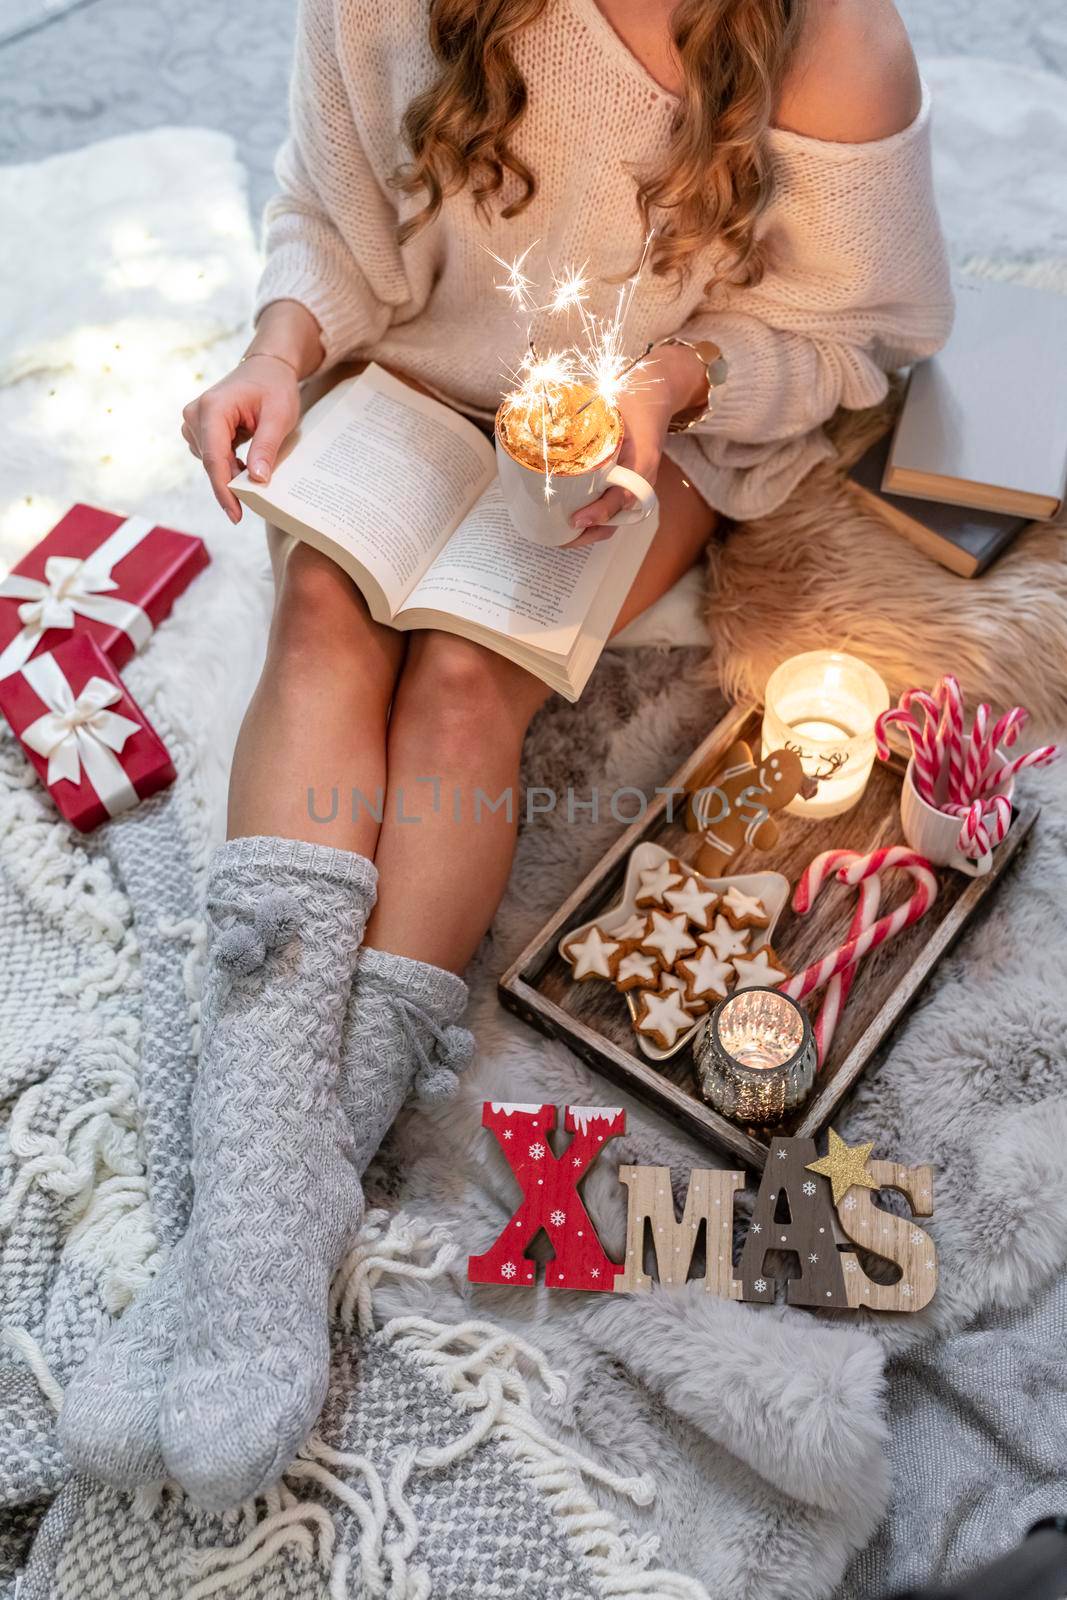 The girl is sitting in a christmas atmosphere, drinking a hot drink and reading a book.